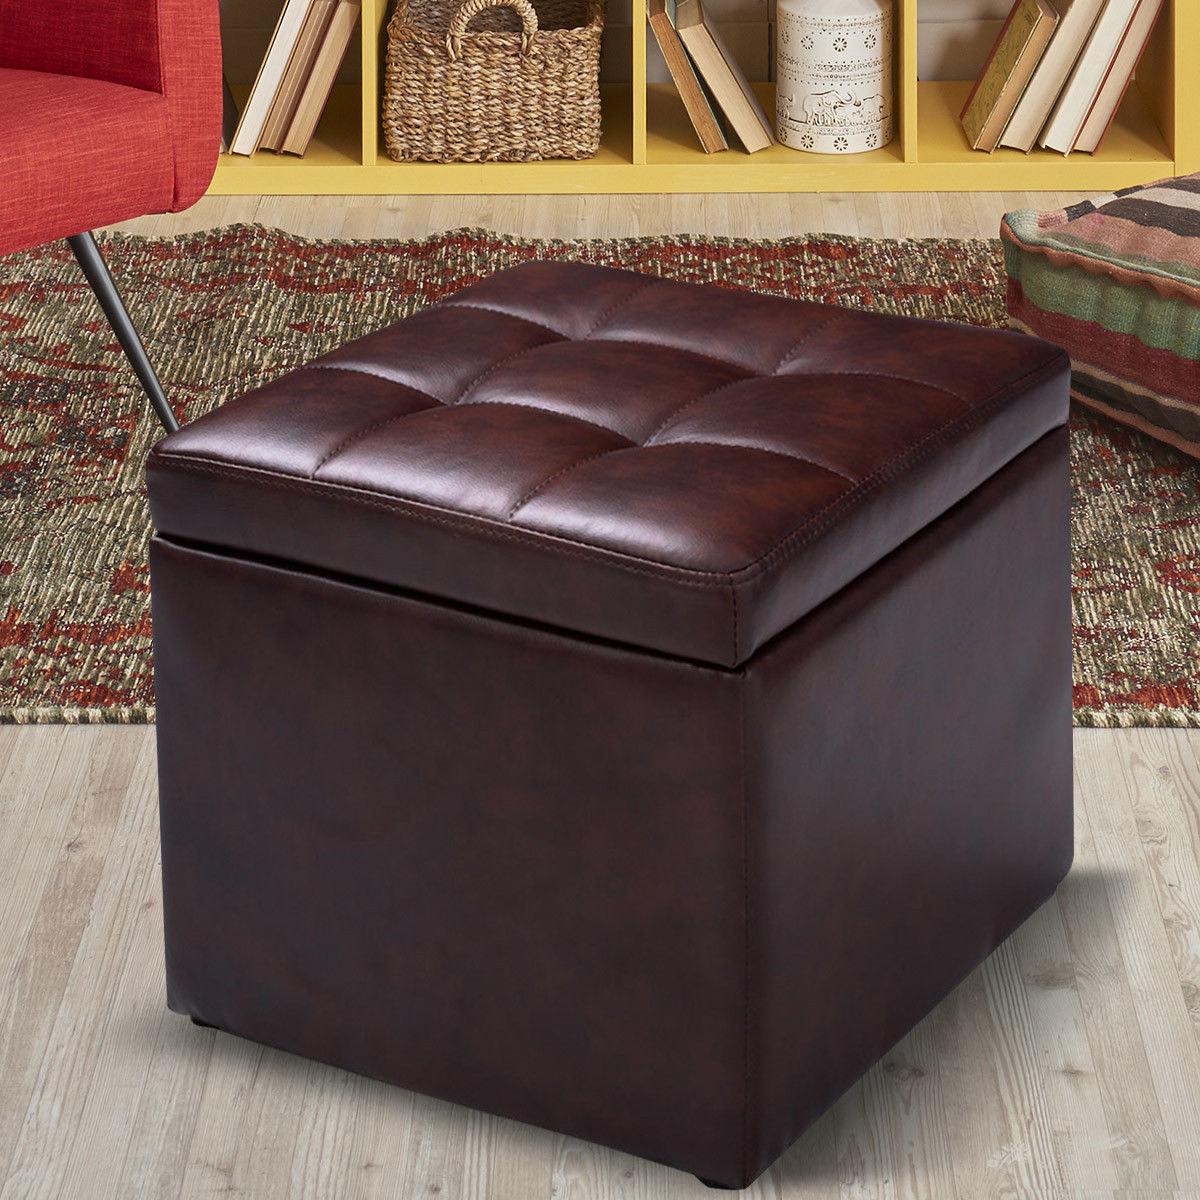 the red brown pouf with things inside it